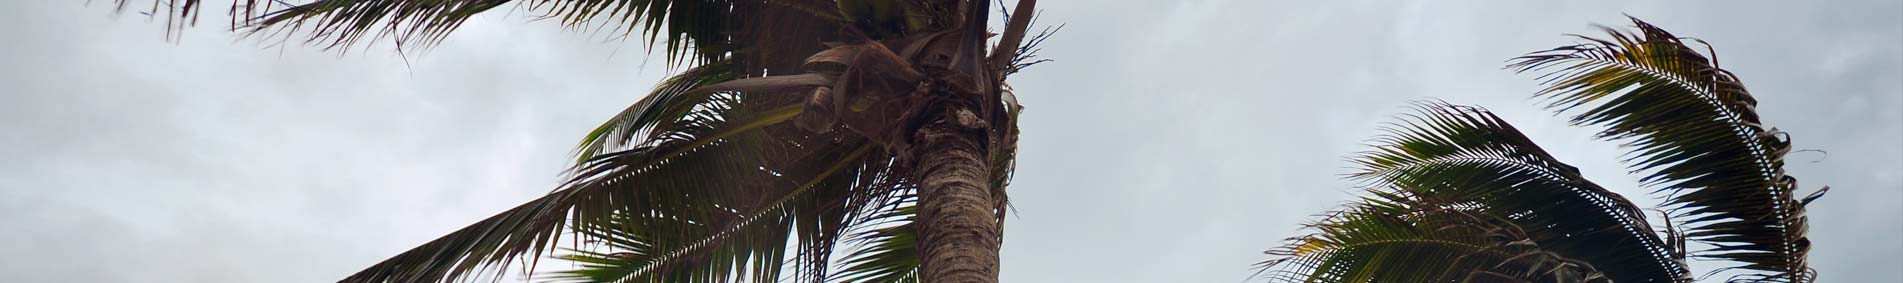 hurricane winds blowing palm trees